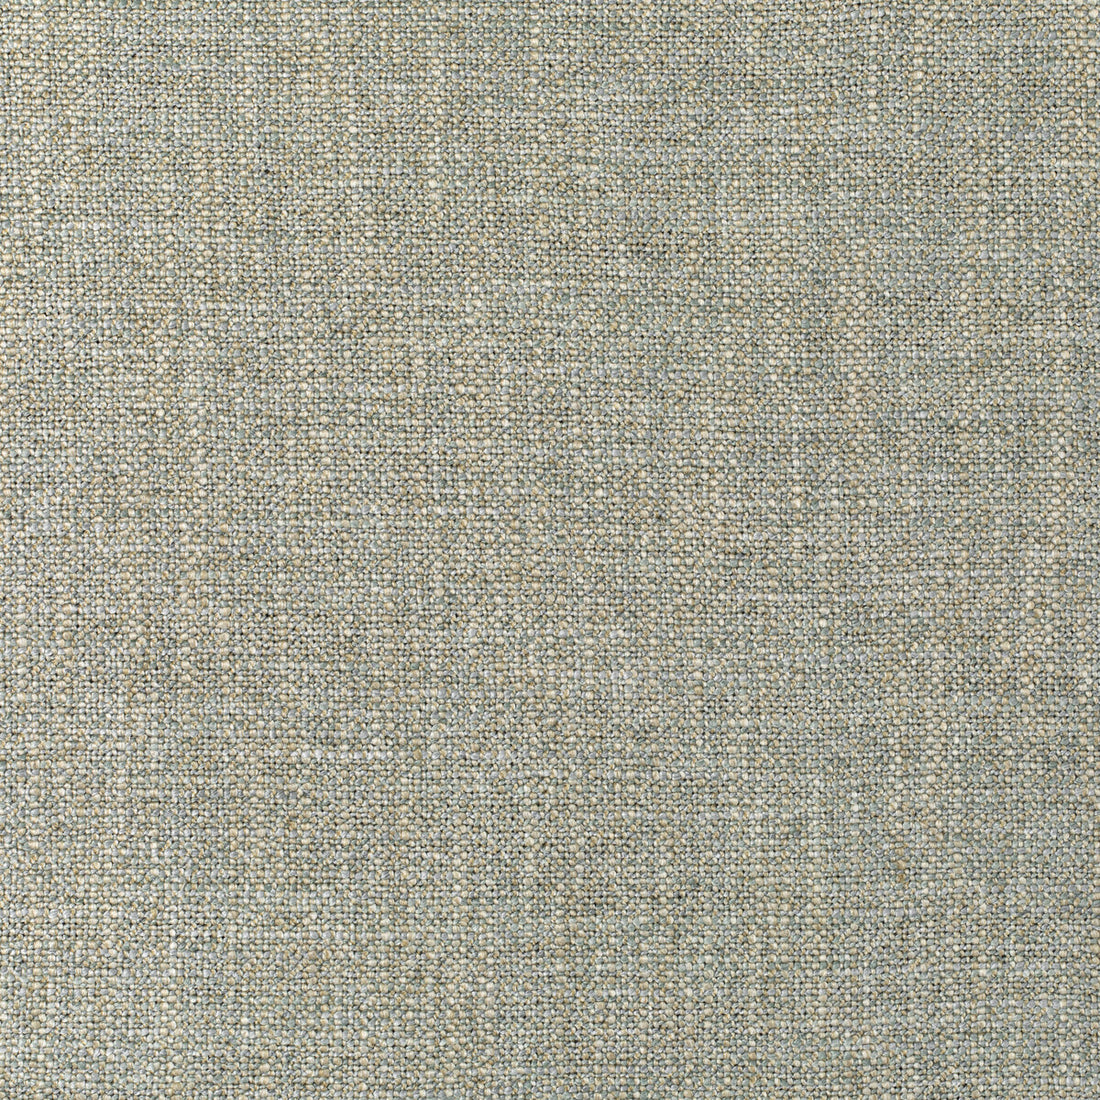 Kravet Couture fabric in 35872-13 color - pattern 35872.13.0 - by Kravet Couture